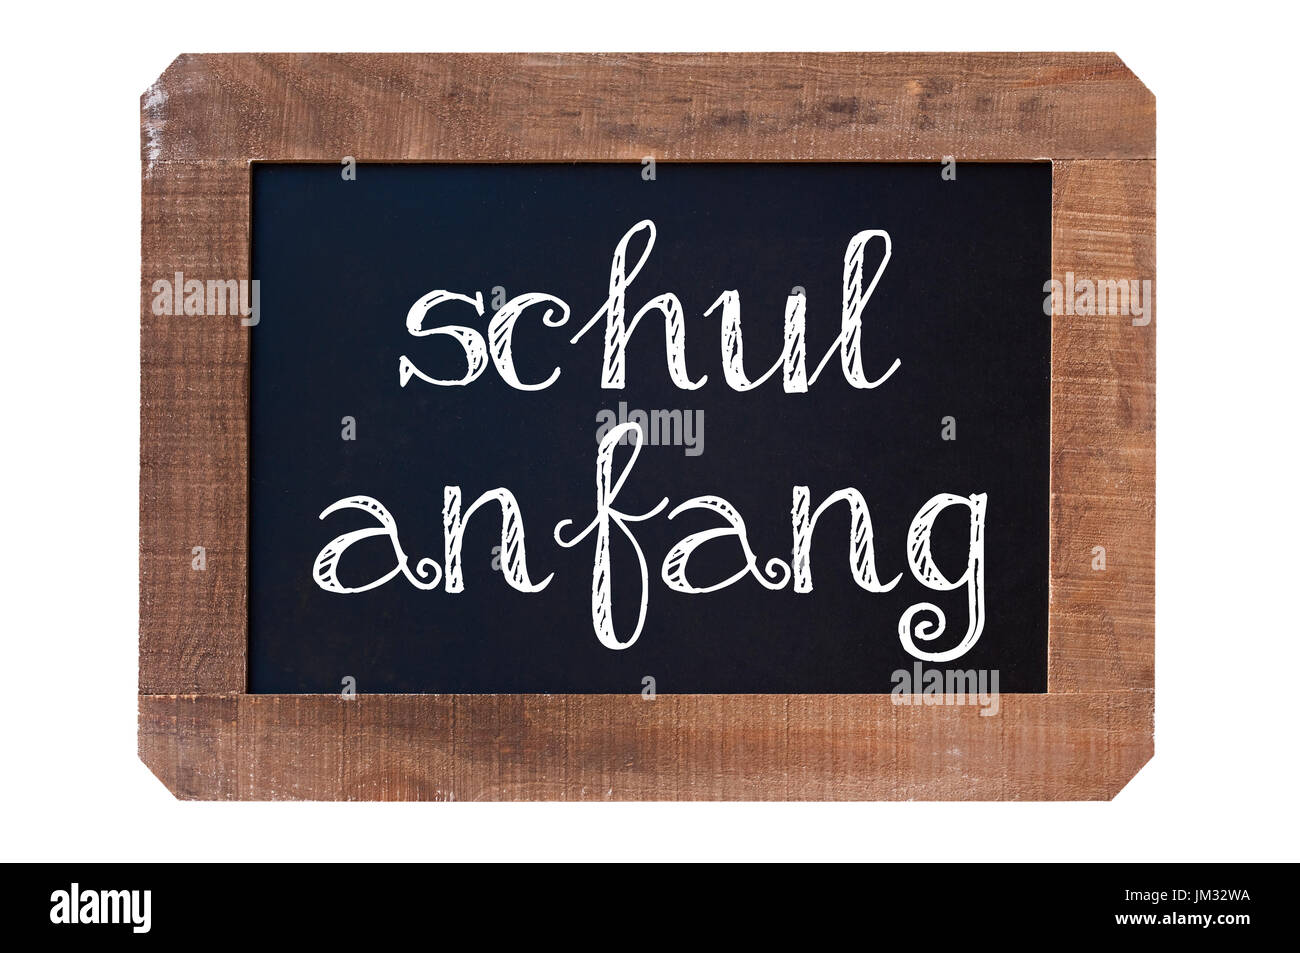 Schulanfang (meaning Back to school) written on a vintage blackboard with wooden frame isolated on white background Stock Photo